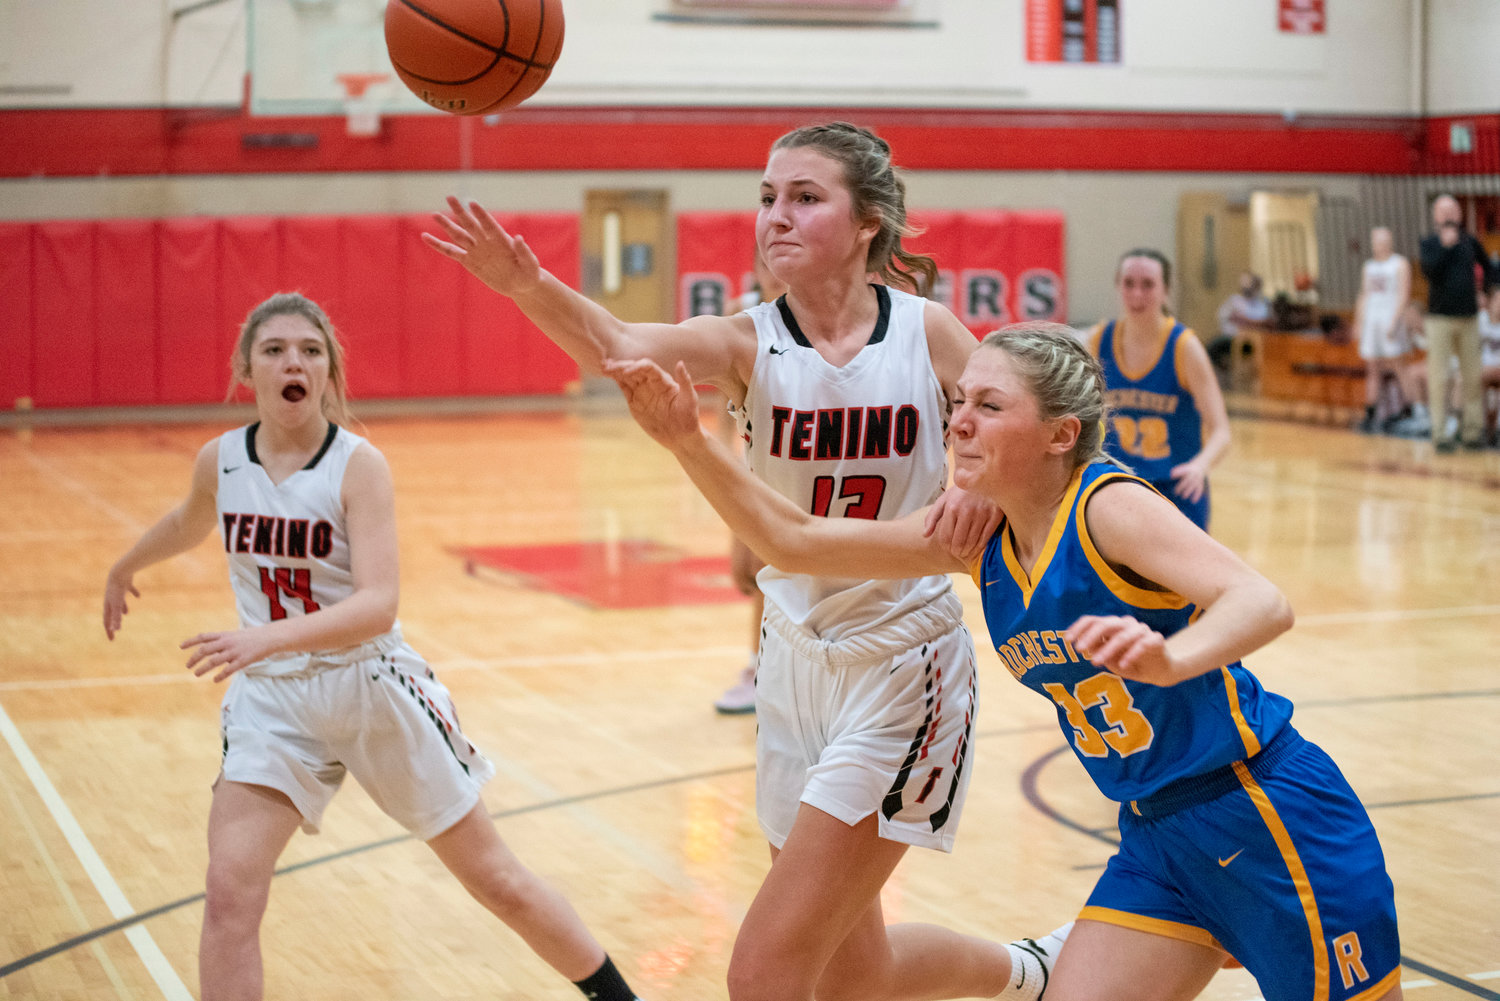 Tenino's Rilee Jones (13) and Rochester's Hannah Rodeheaver (33) battle for a loose ball on Dec. 2.